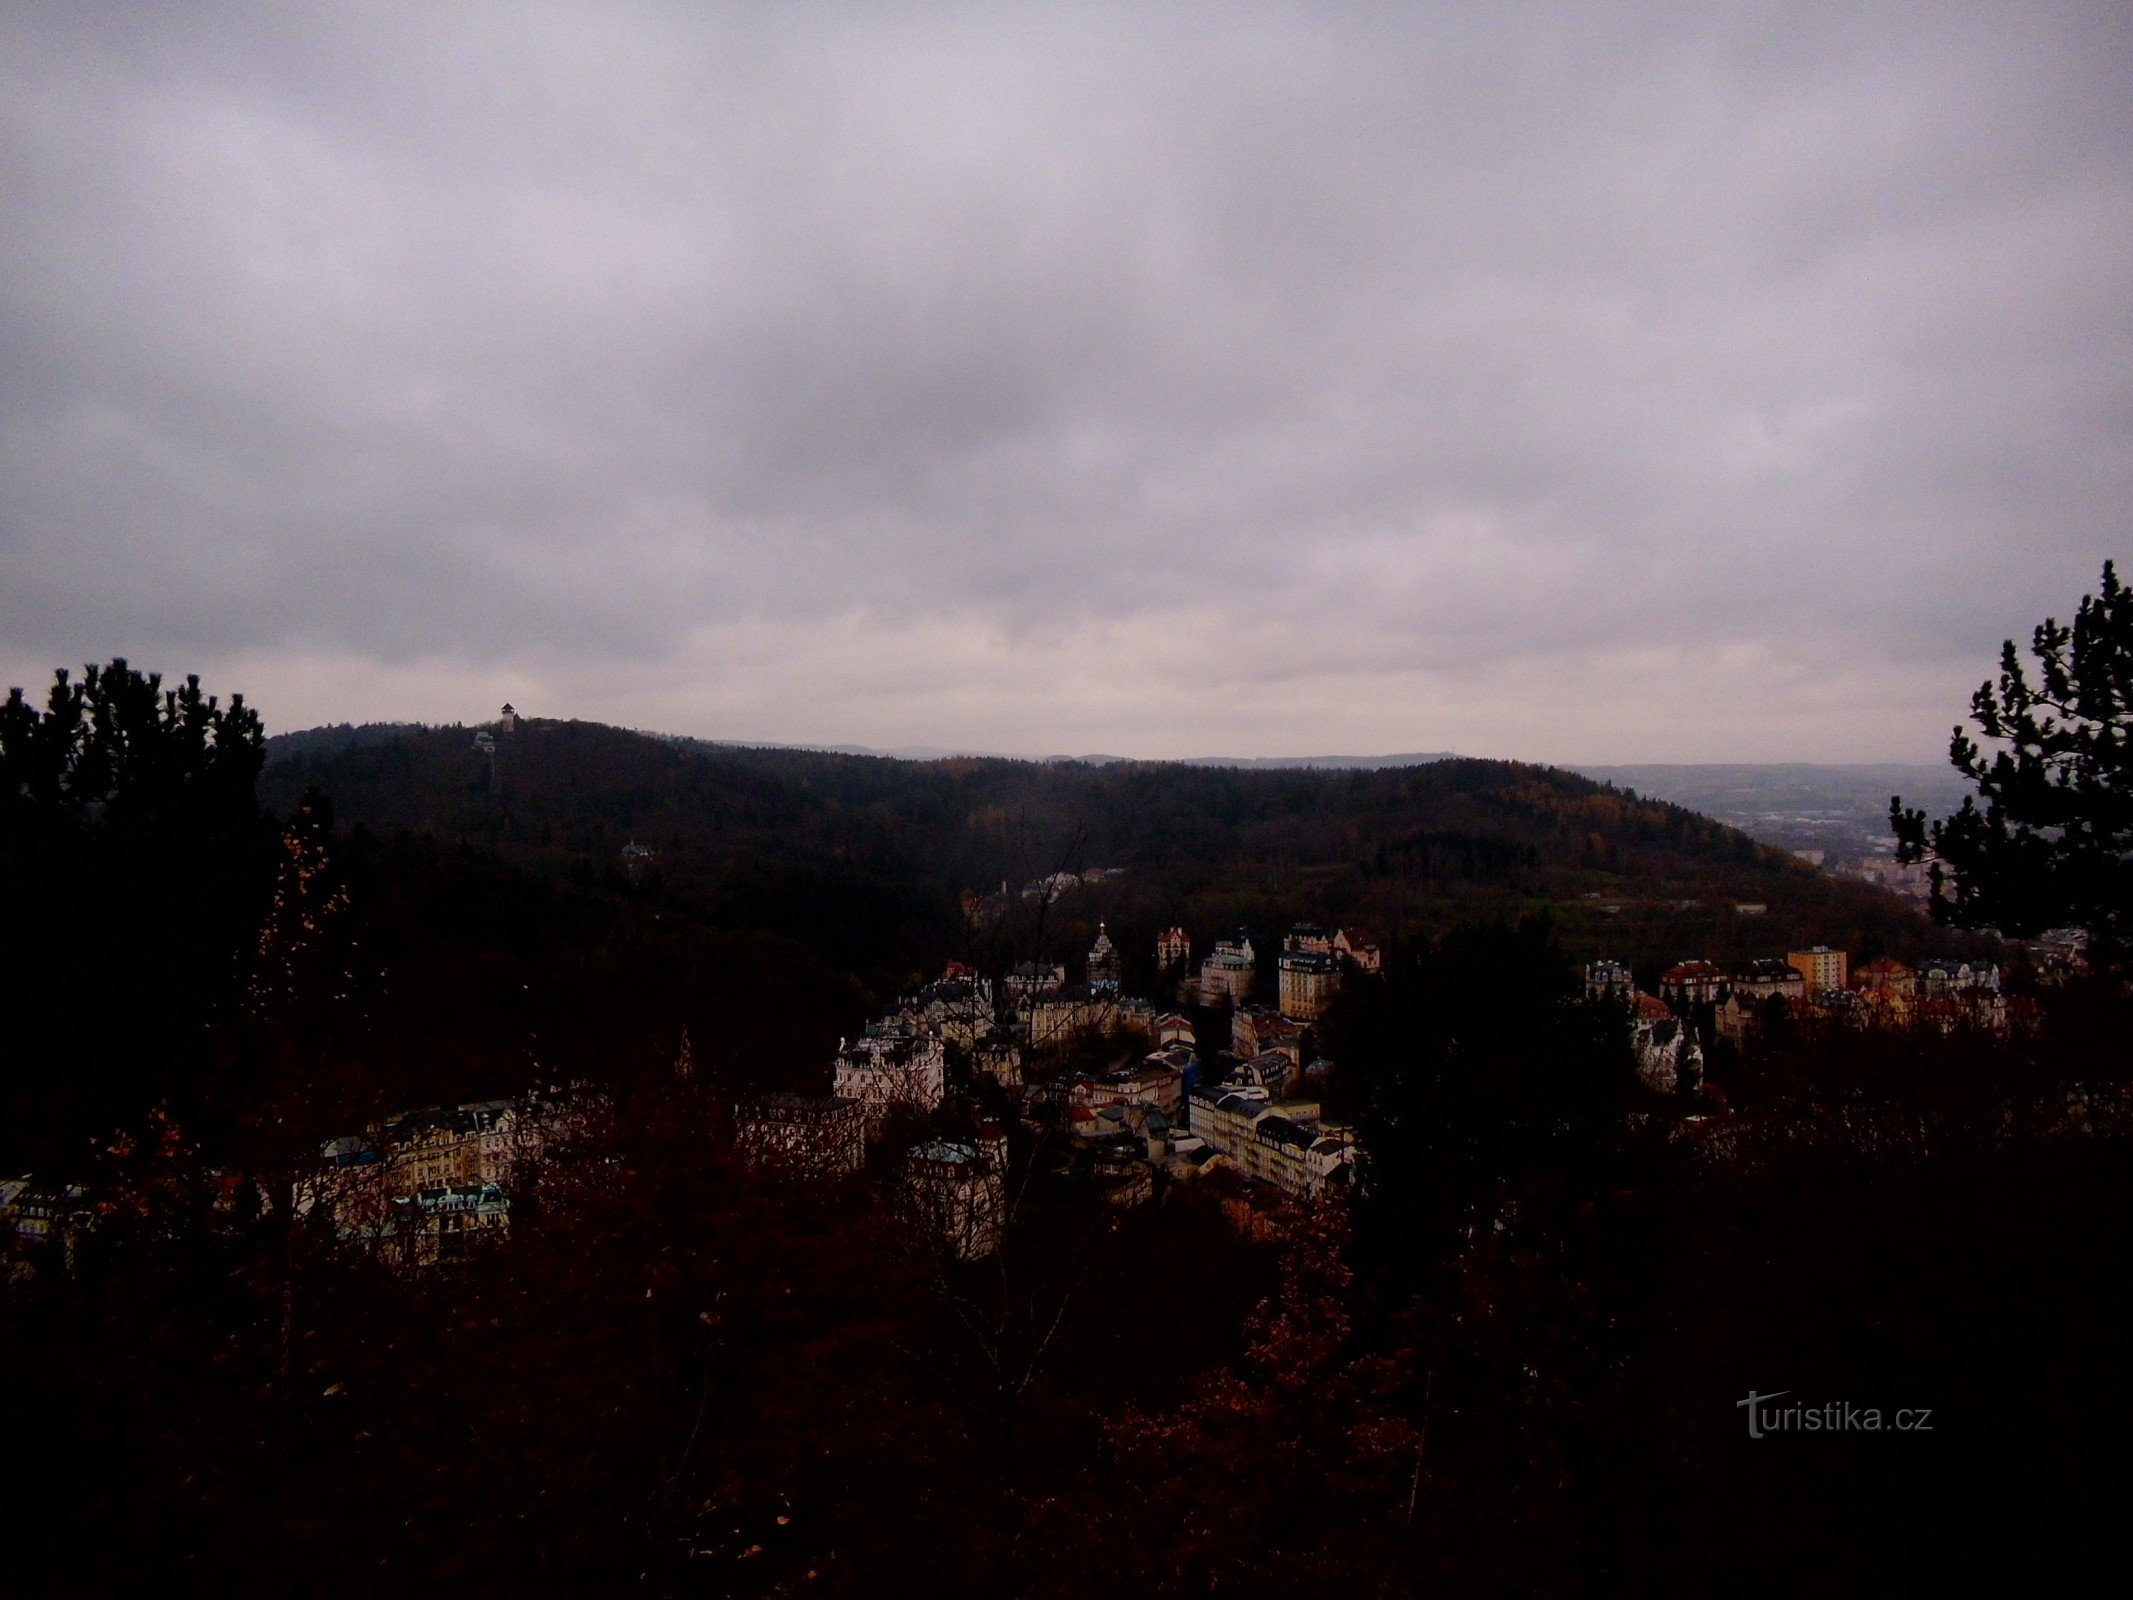 Around Karlovy Vary - through the Three Crosses, the lookout tower and the observatory